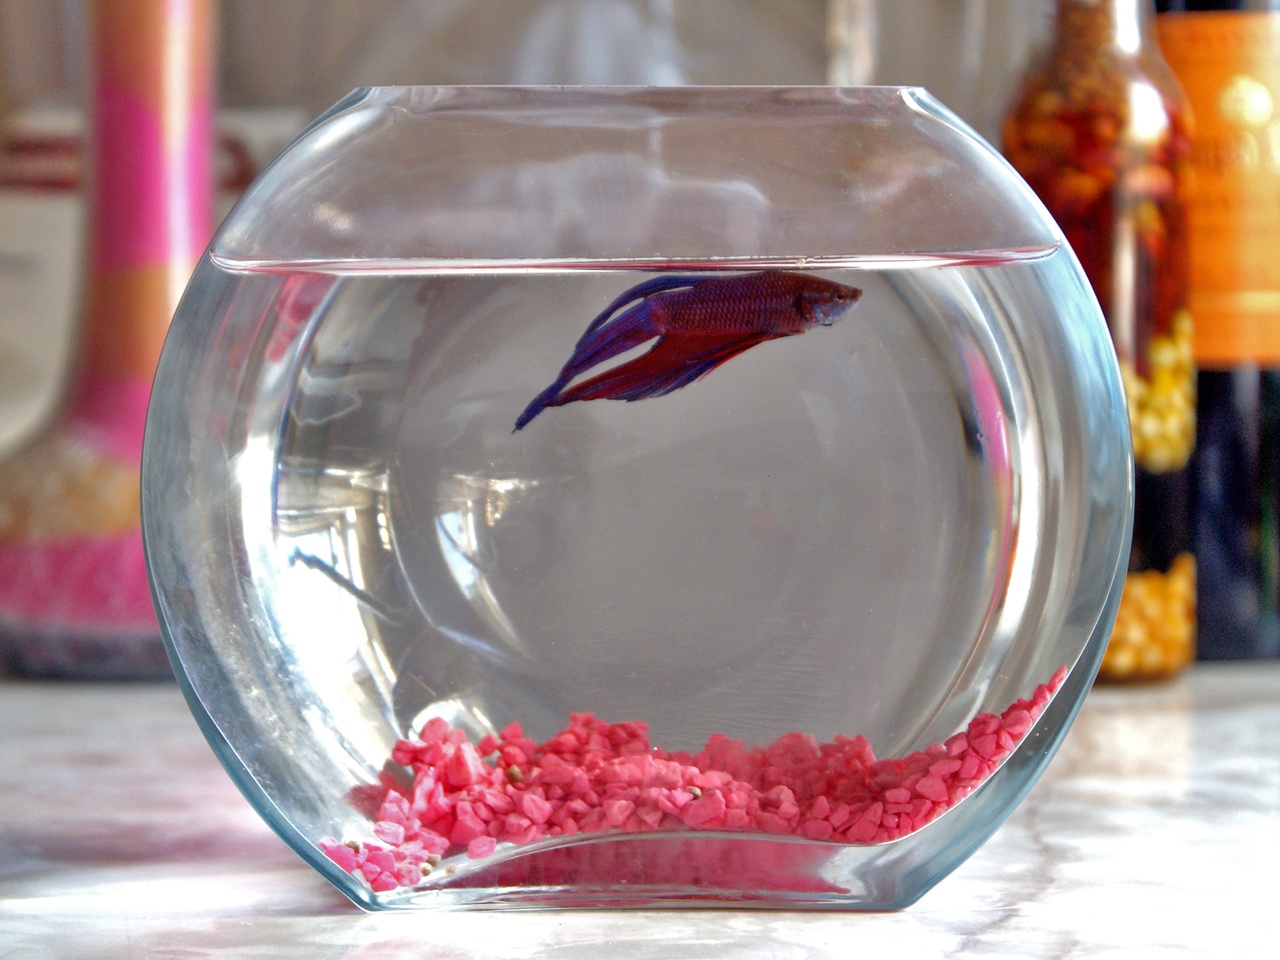 Forget everything you've ever heard about Beta fish